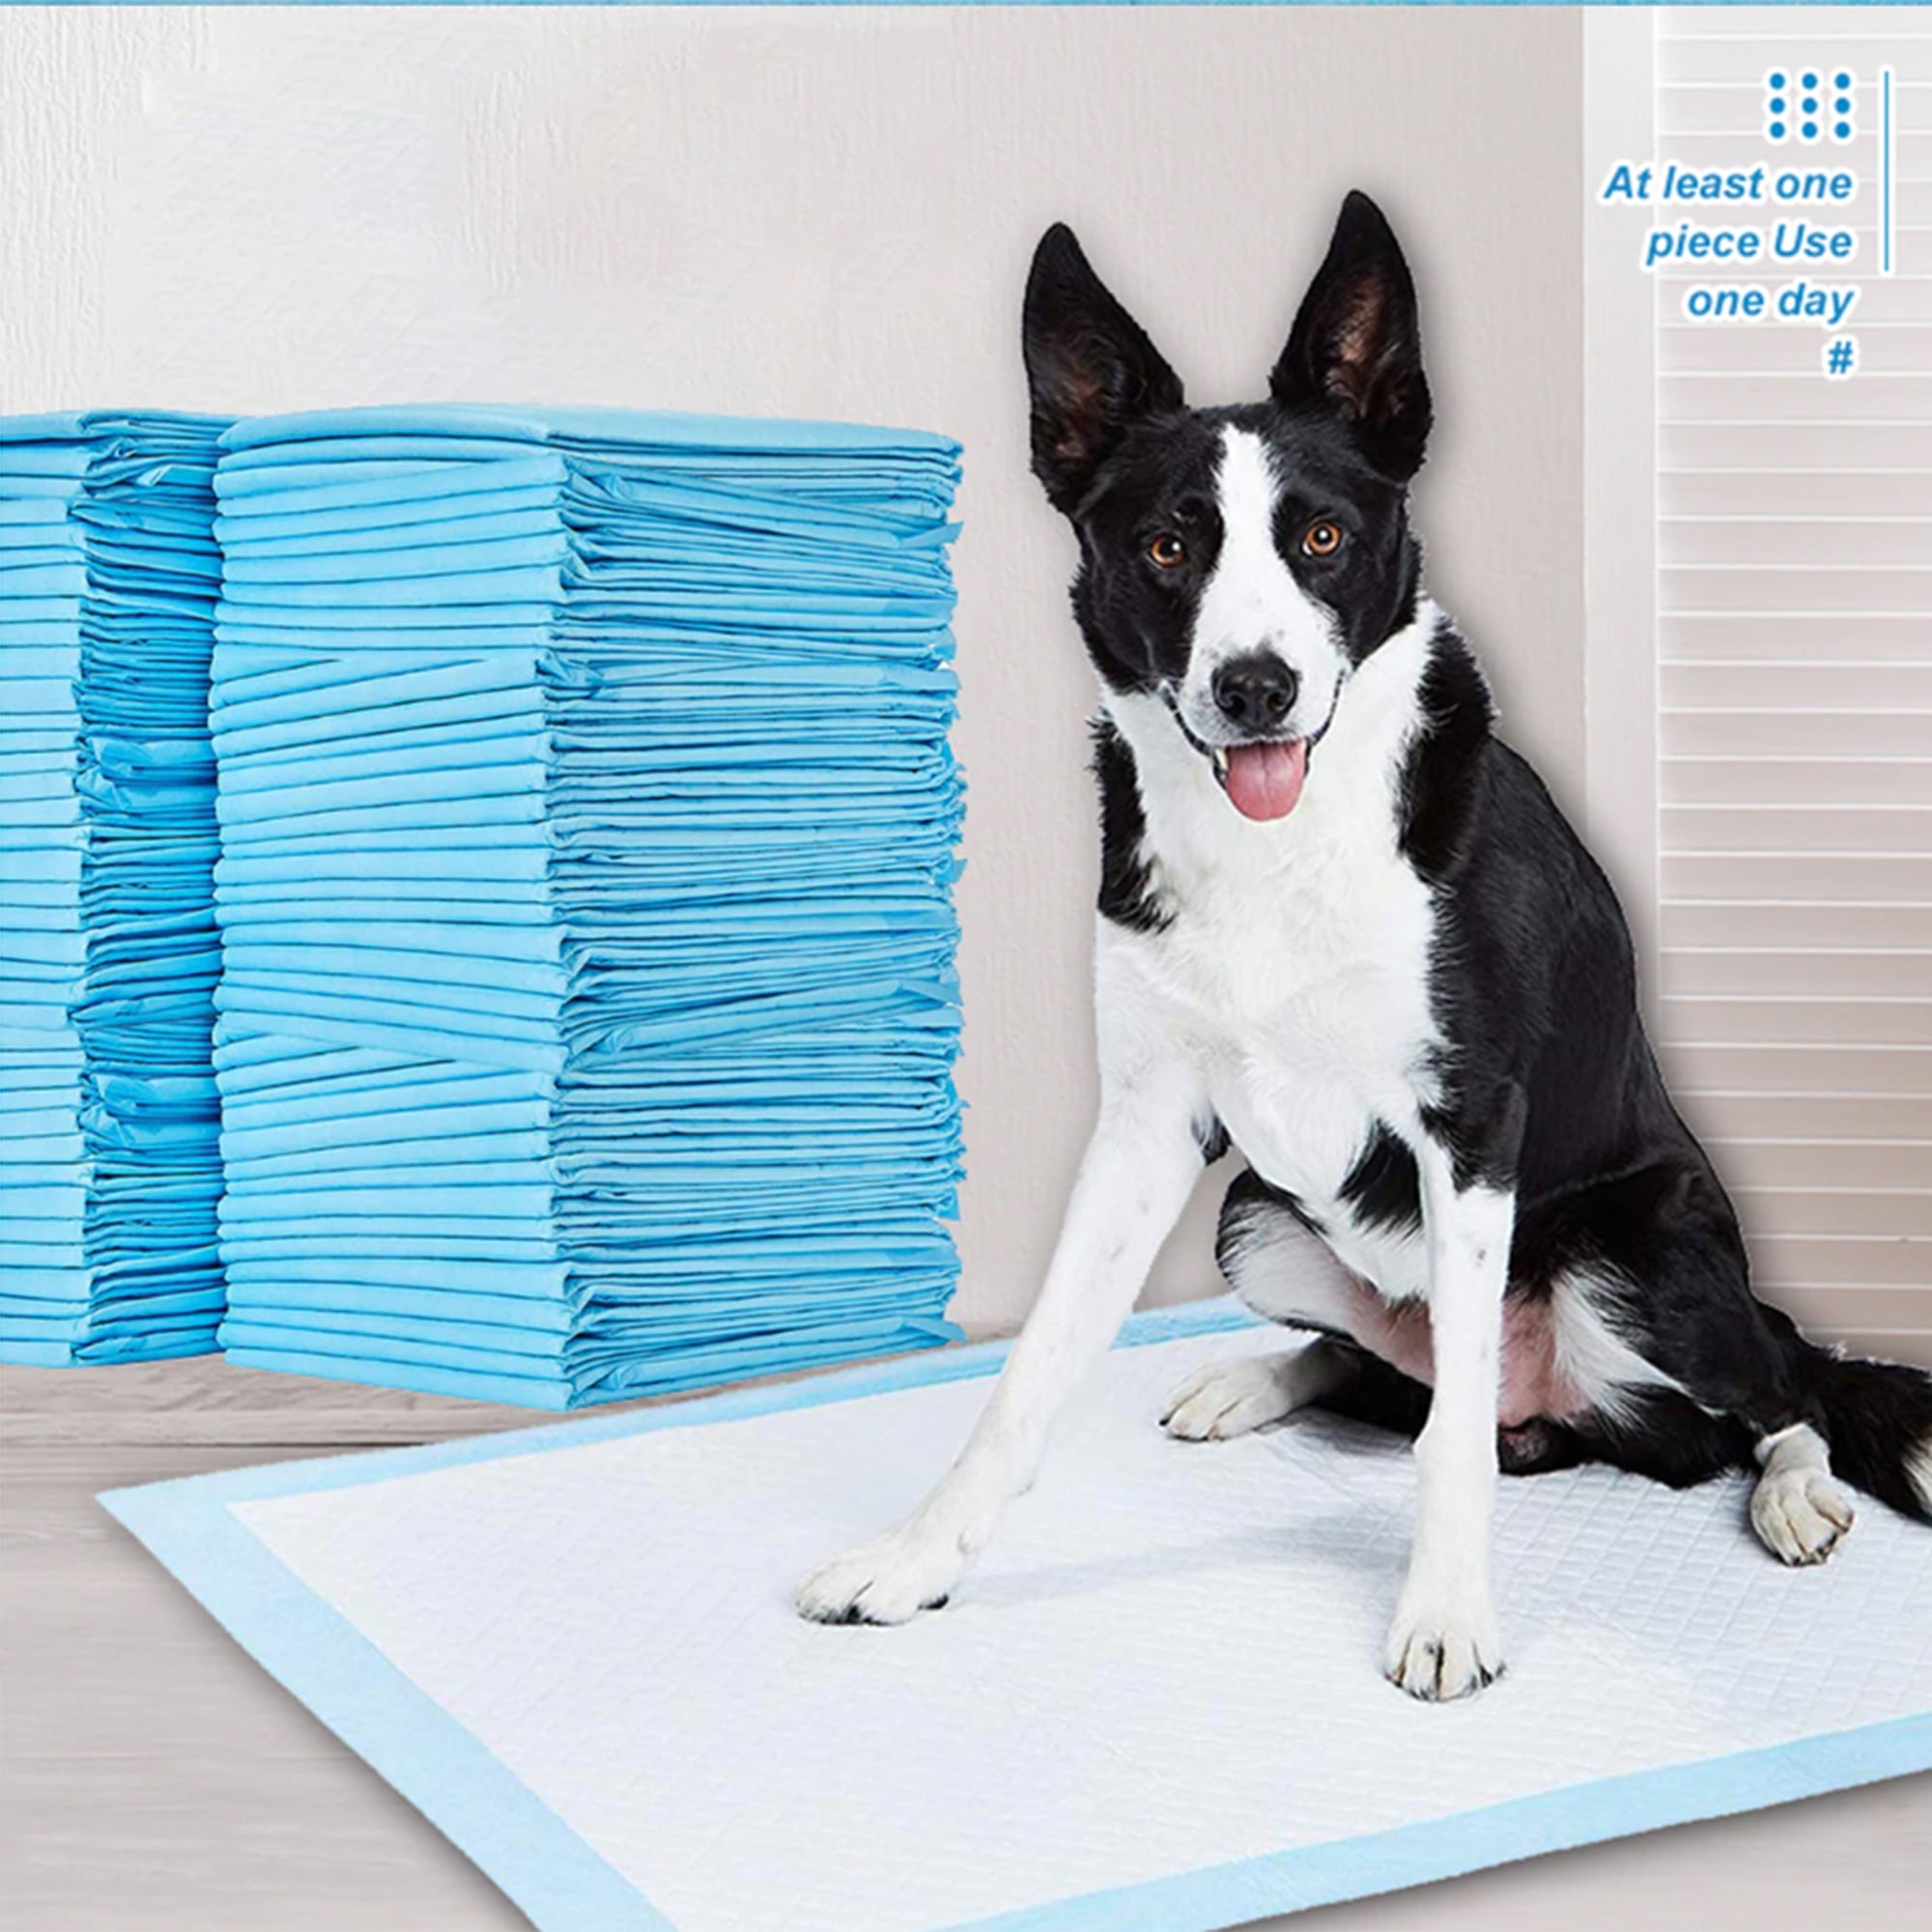 50 Light 30x30 Disposable Pet Dog House Training Wee Pee Pad Puppy Pee Underpads 